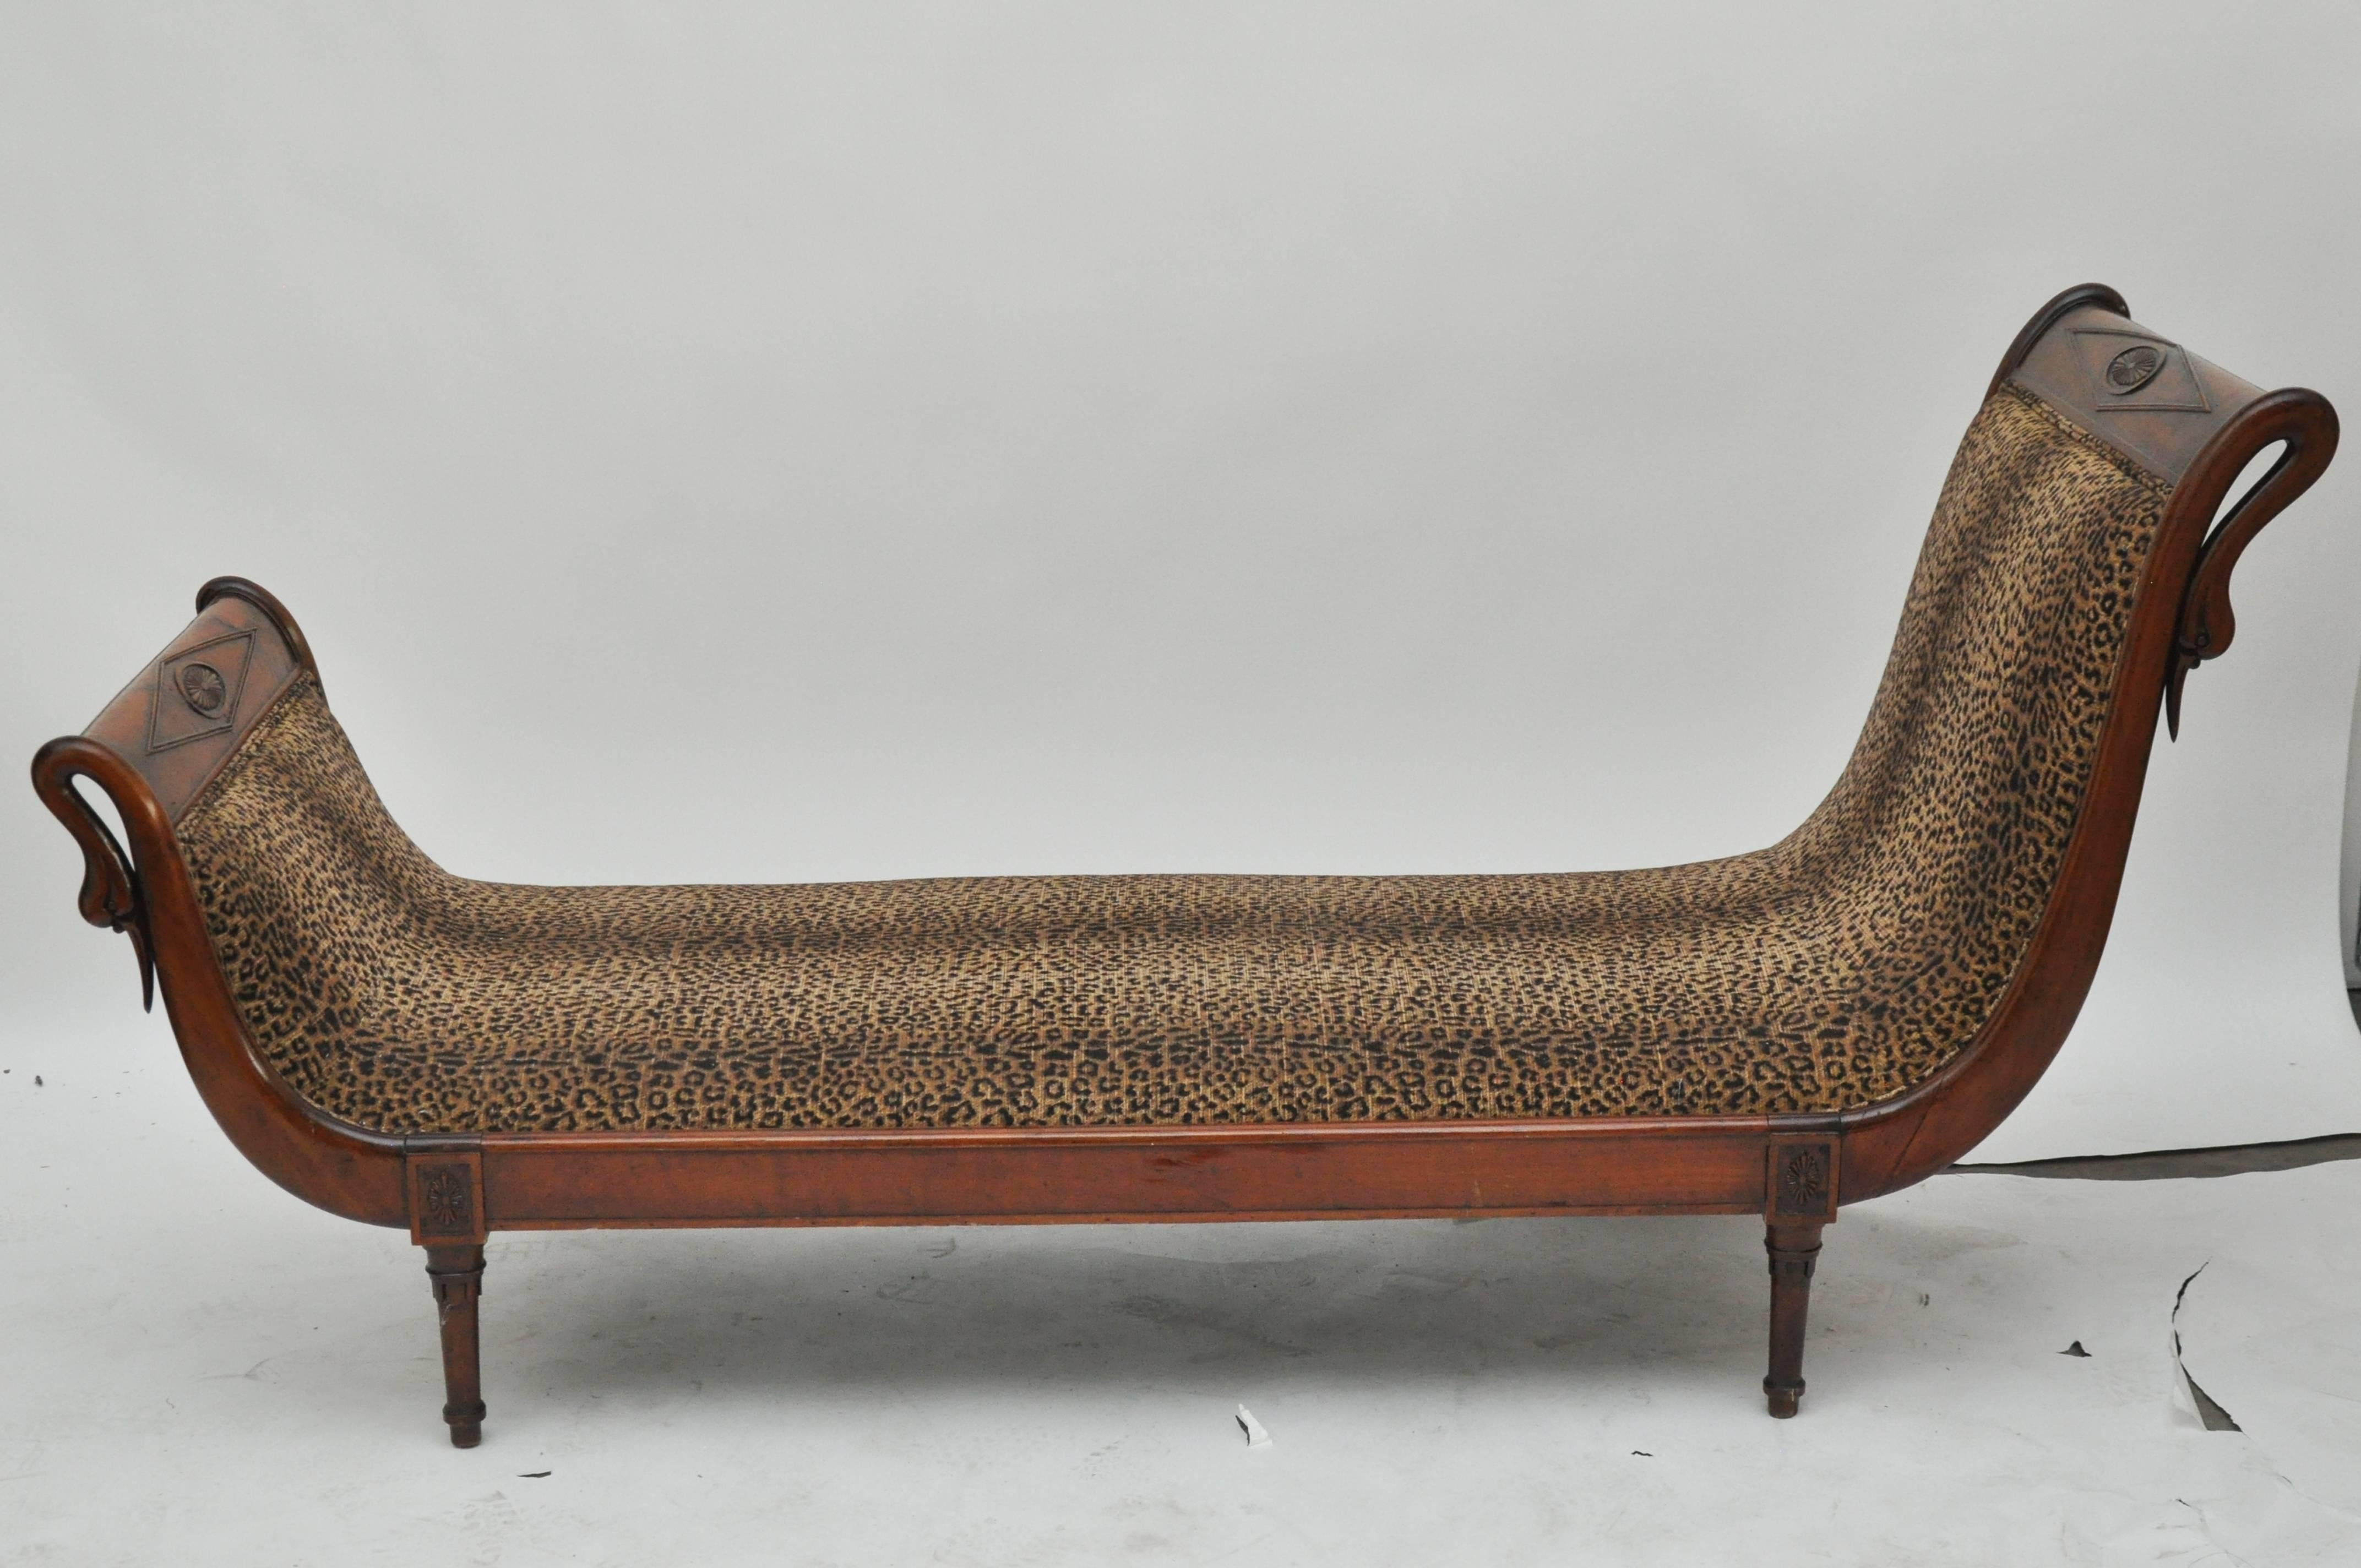 19th century French chaise with carved swans.  Directoire style.  solid mahogany wood.  newly upholstered in leopard print fabric.  the chaise is sturdy and restored.